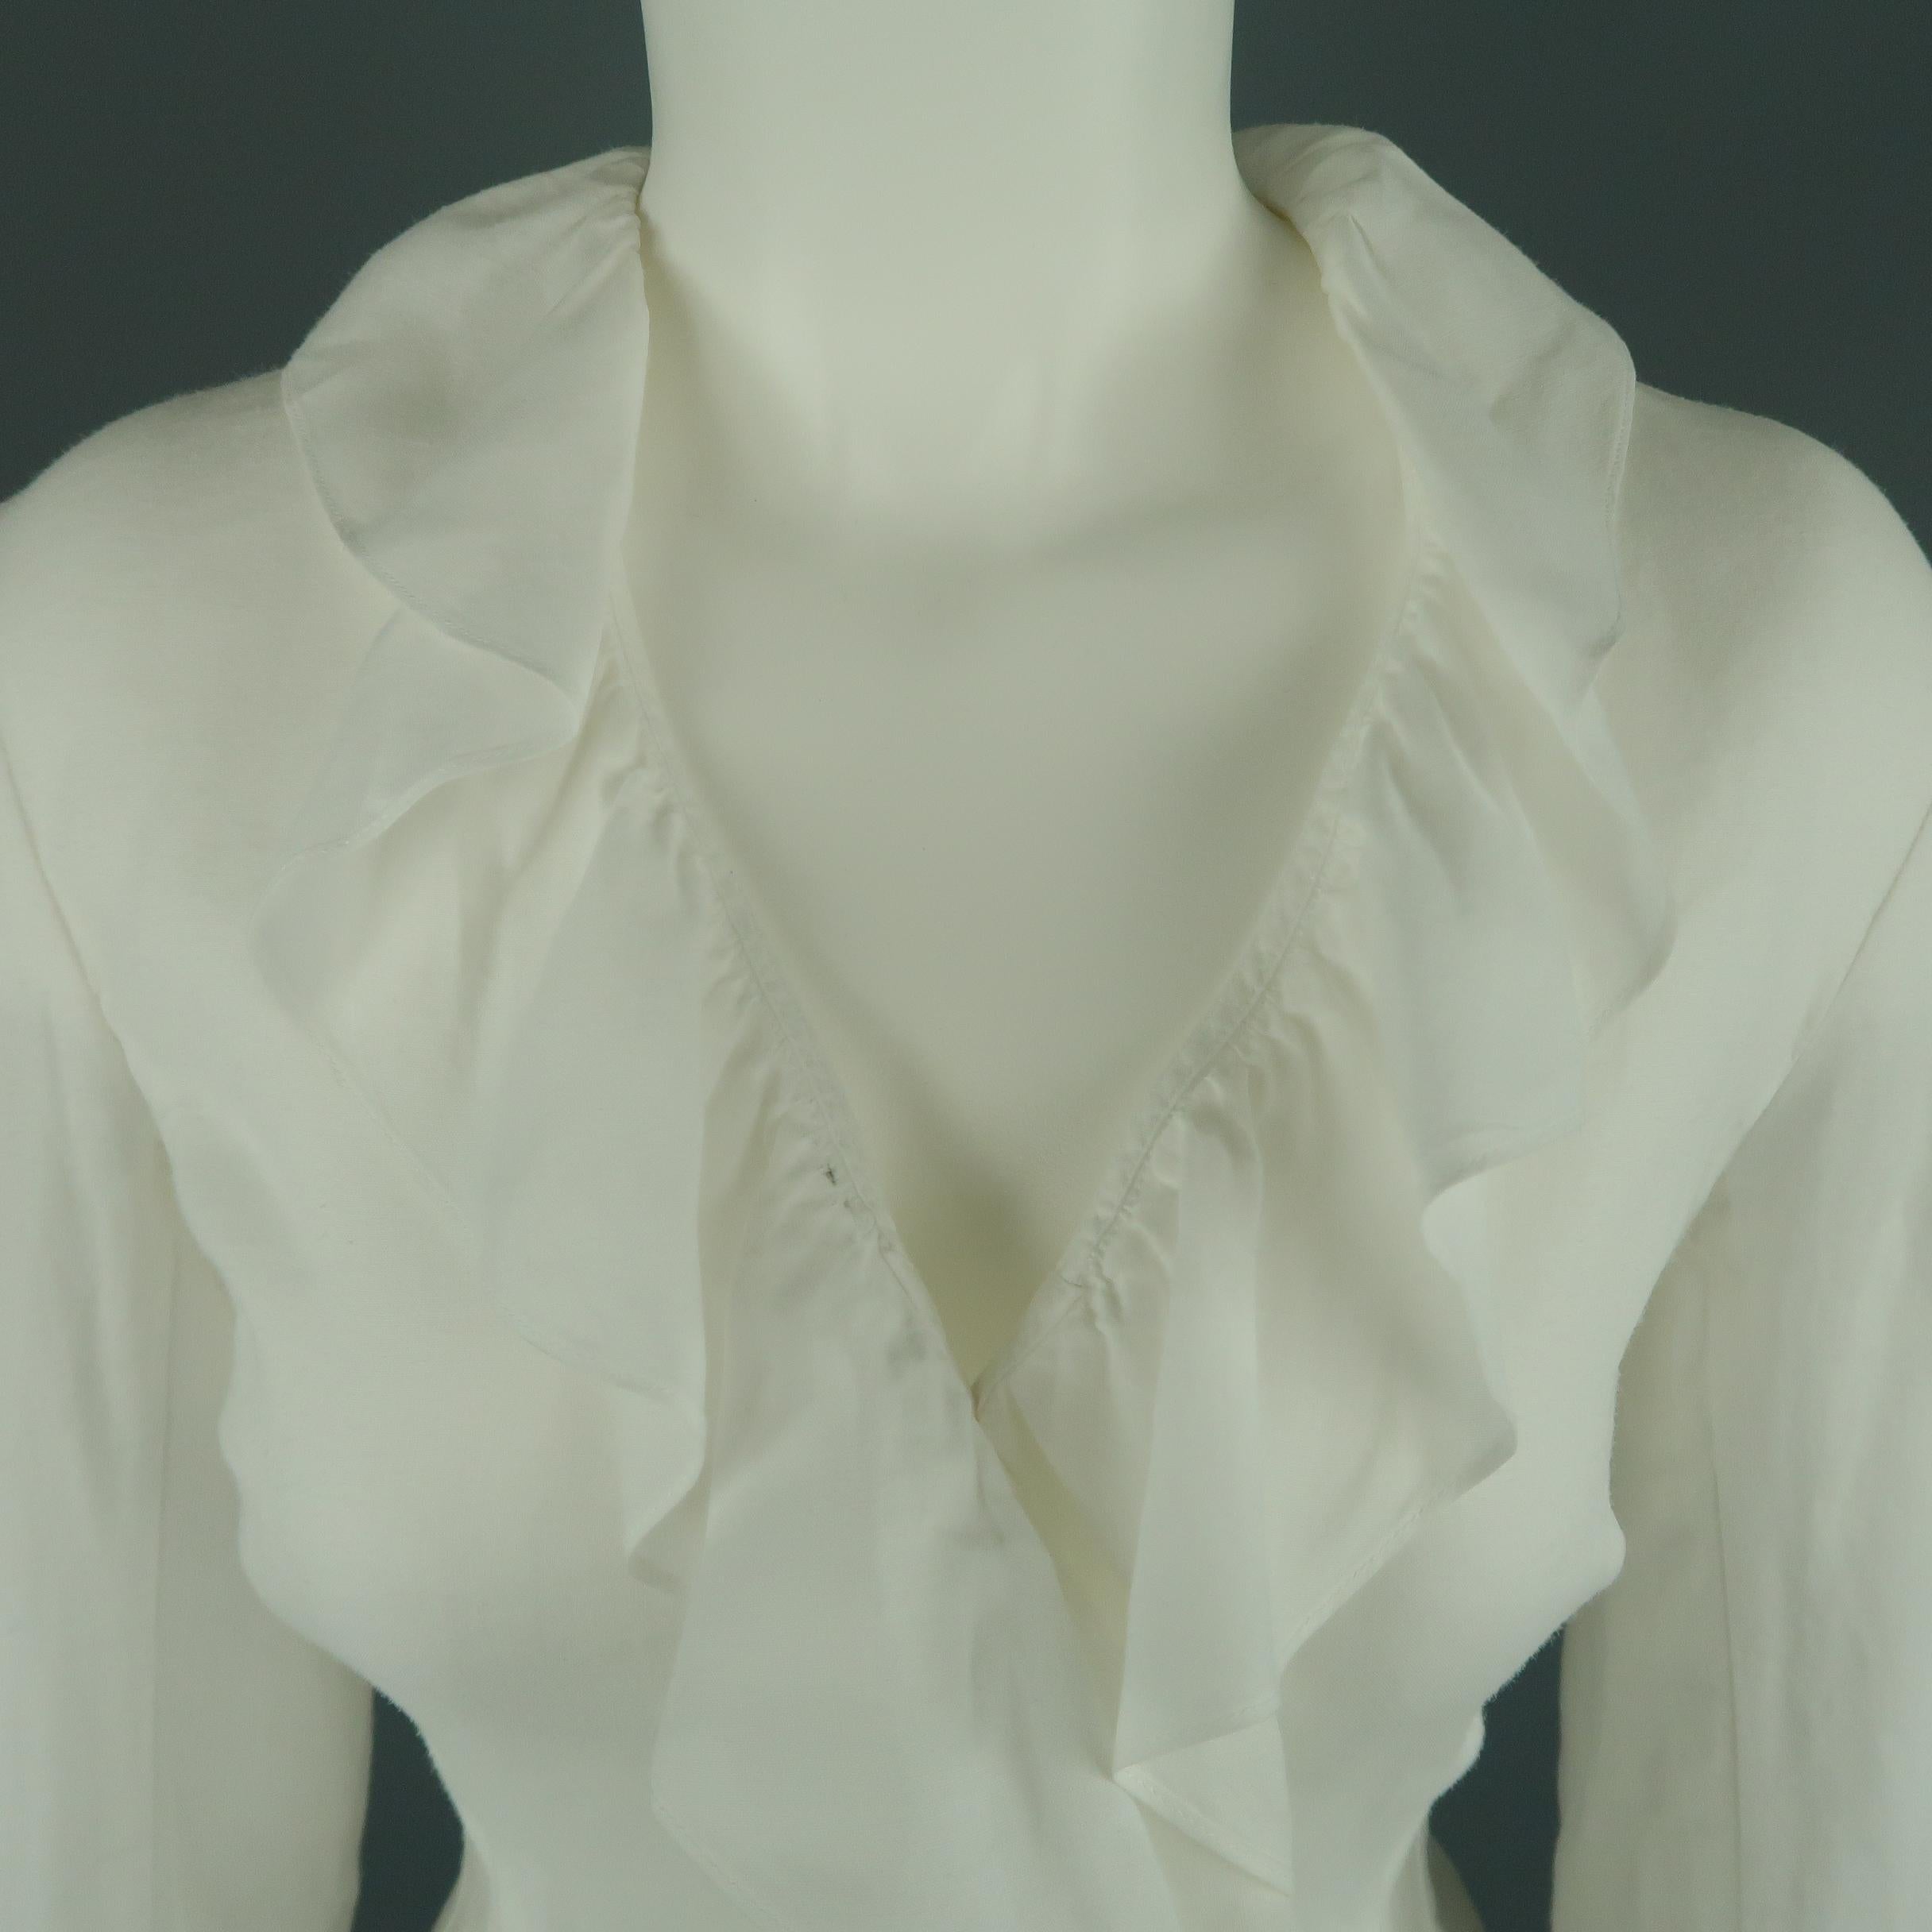 RALPH LAUREN BLACK LABEL blouse comes in white sheer ramie and features a V neck, three quarter sleeves, and ruffled collar and hem. Stain on neckline. As-is.
 
Fair Pre-Owned Condition.
Marked: 6
 
Measurements:
 
Shoulder: 16 in.
Bust: 36